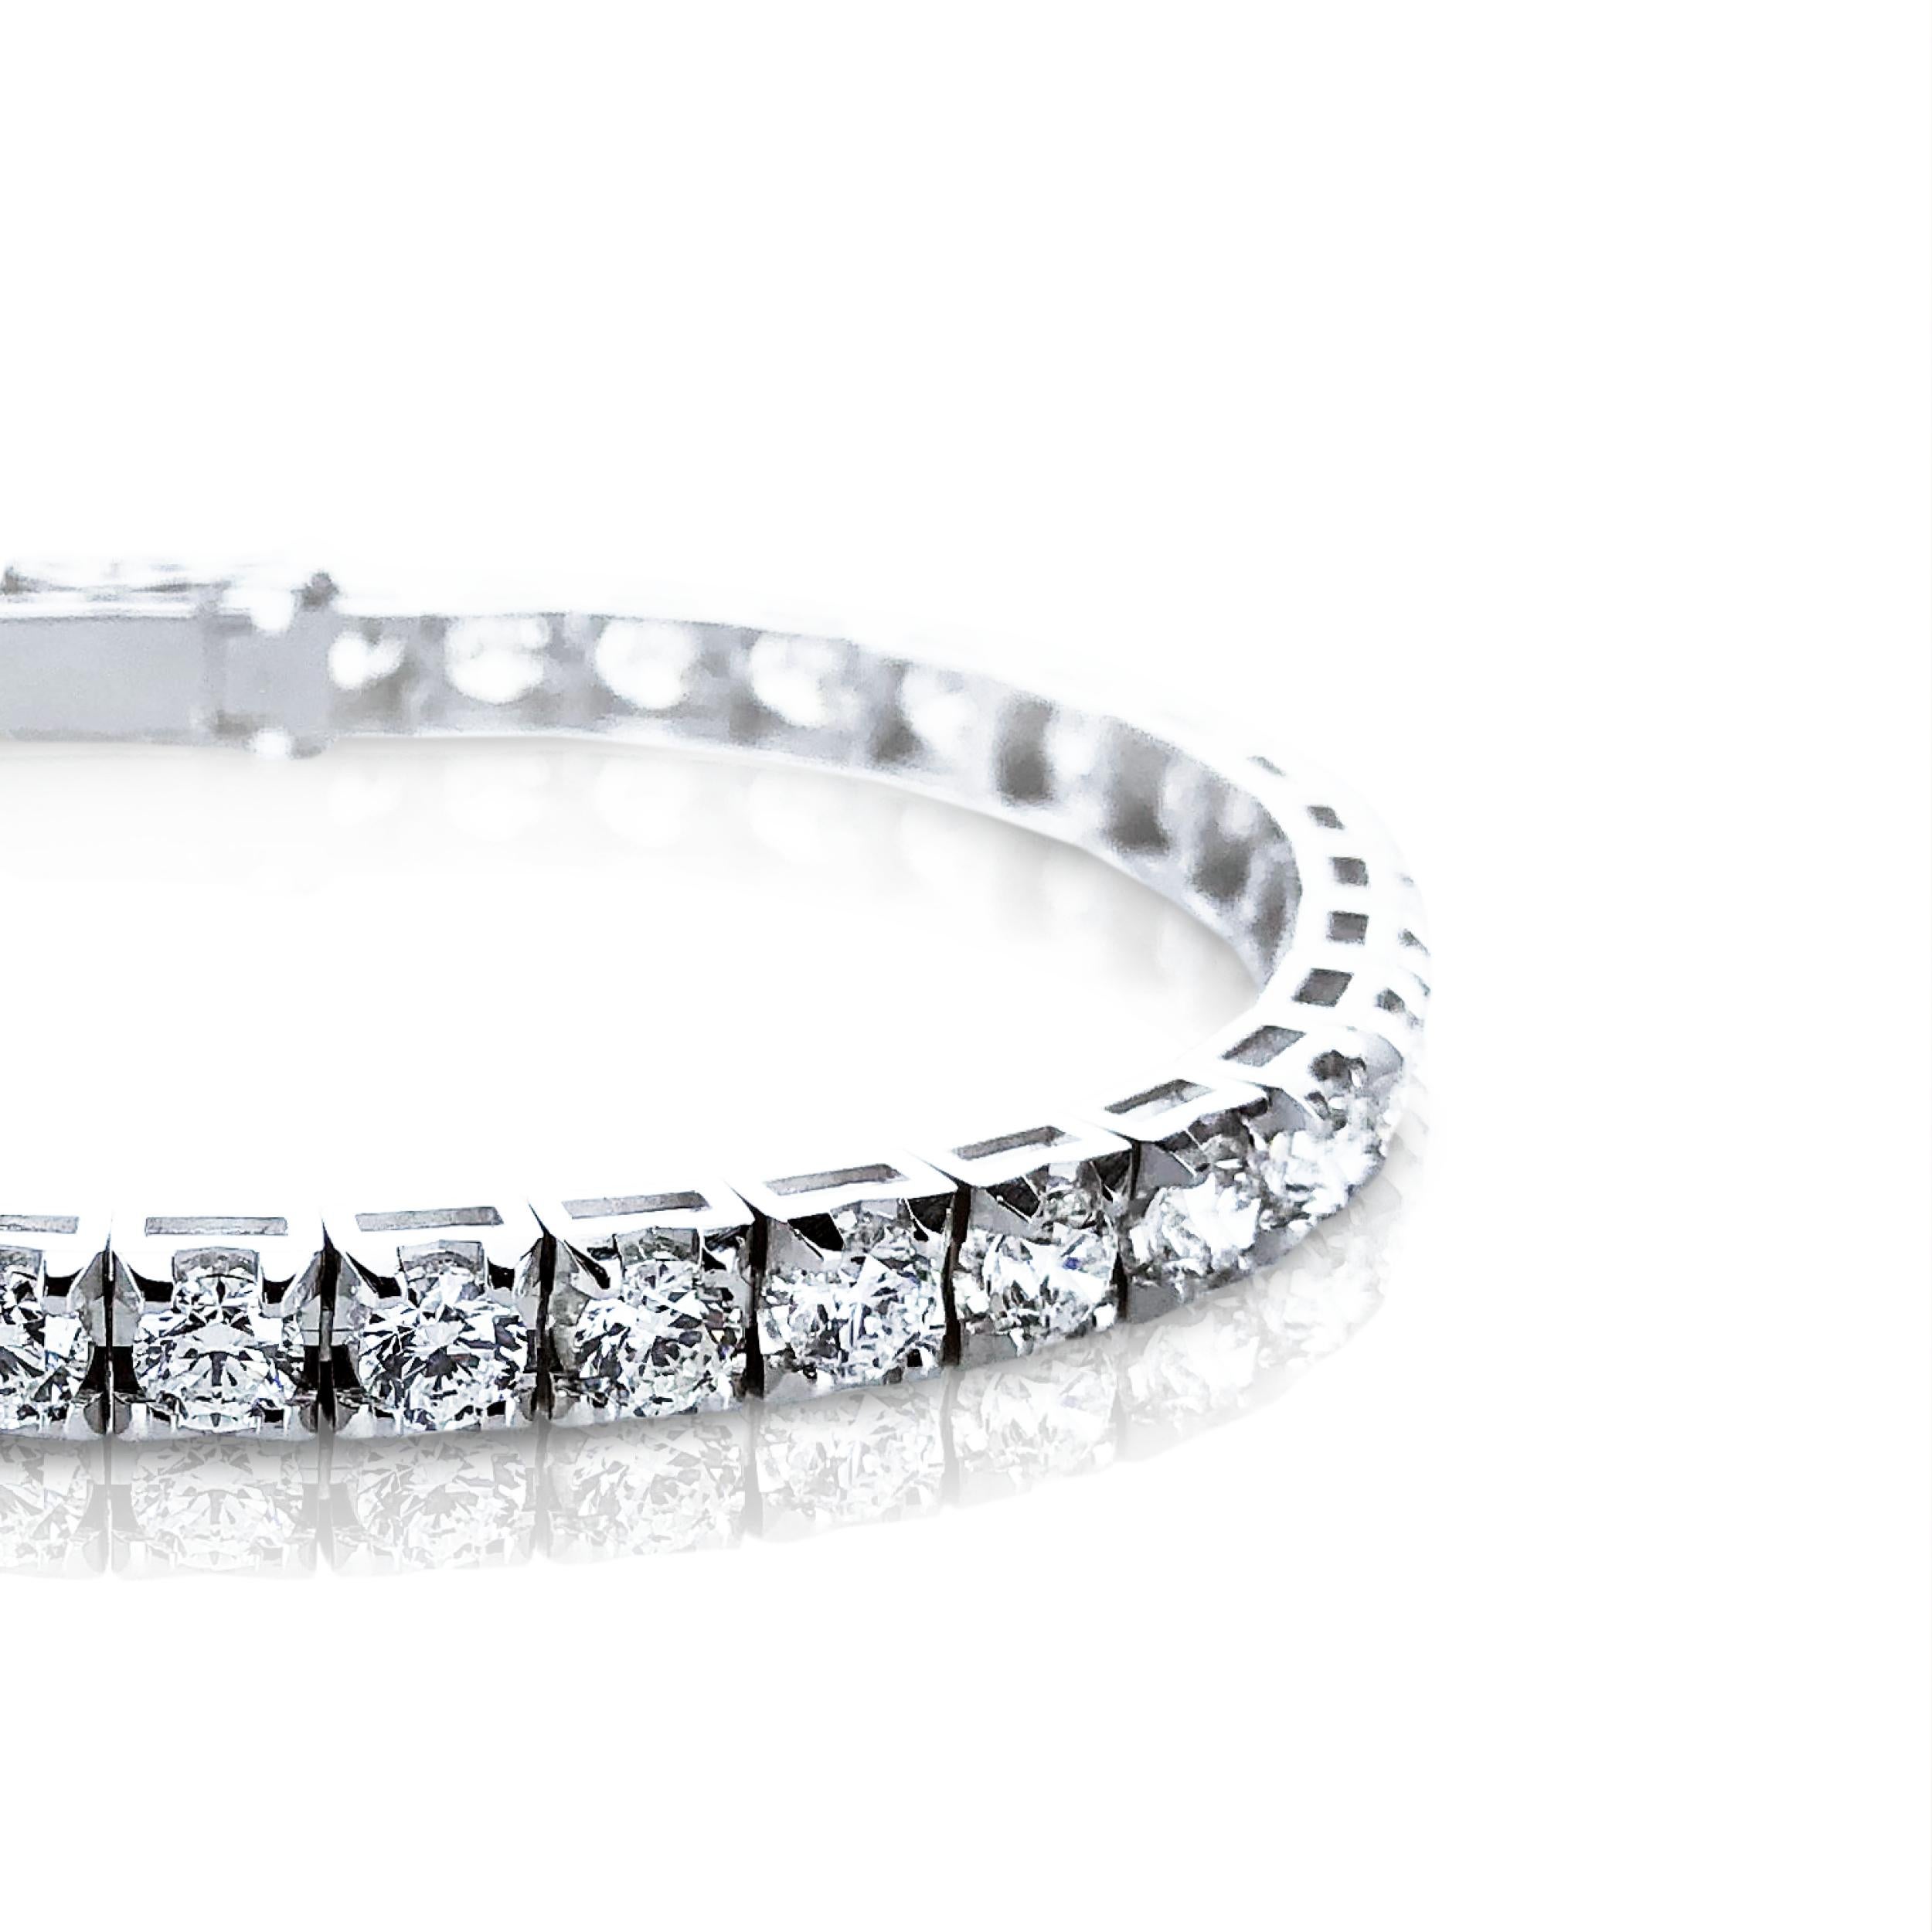 This 1.38 Carat HRD Certified Diamond Unisex Tennis Bracelet is set in 18kt white Gold. 

Timelessly stylish and wearable it is designed with the pyramid setting making the diamond appear larger than normal and effortlessly adding style and elegance